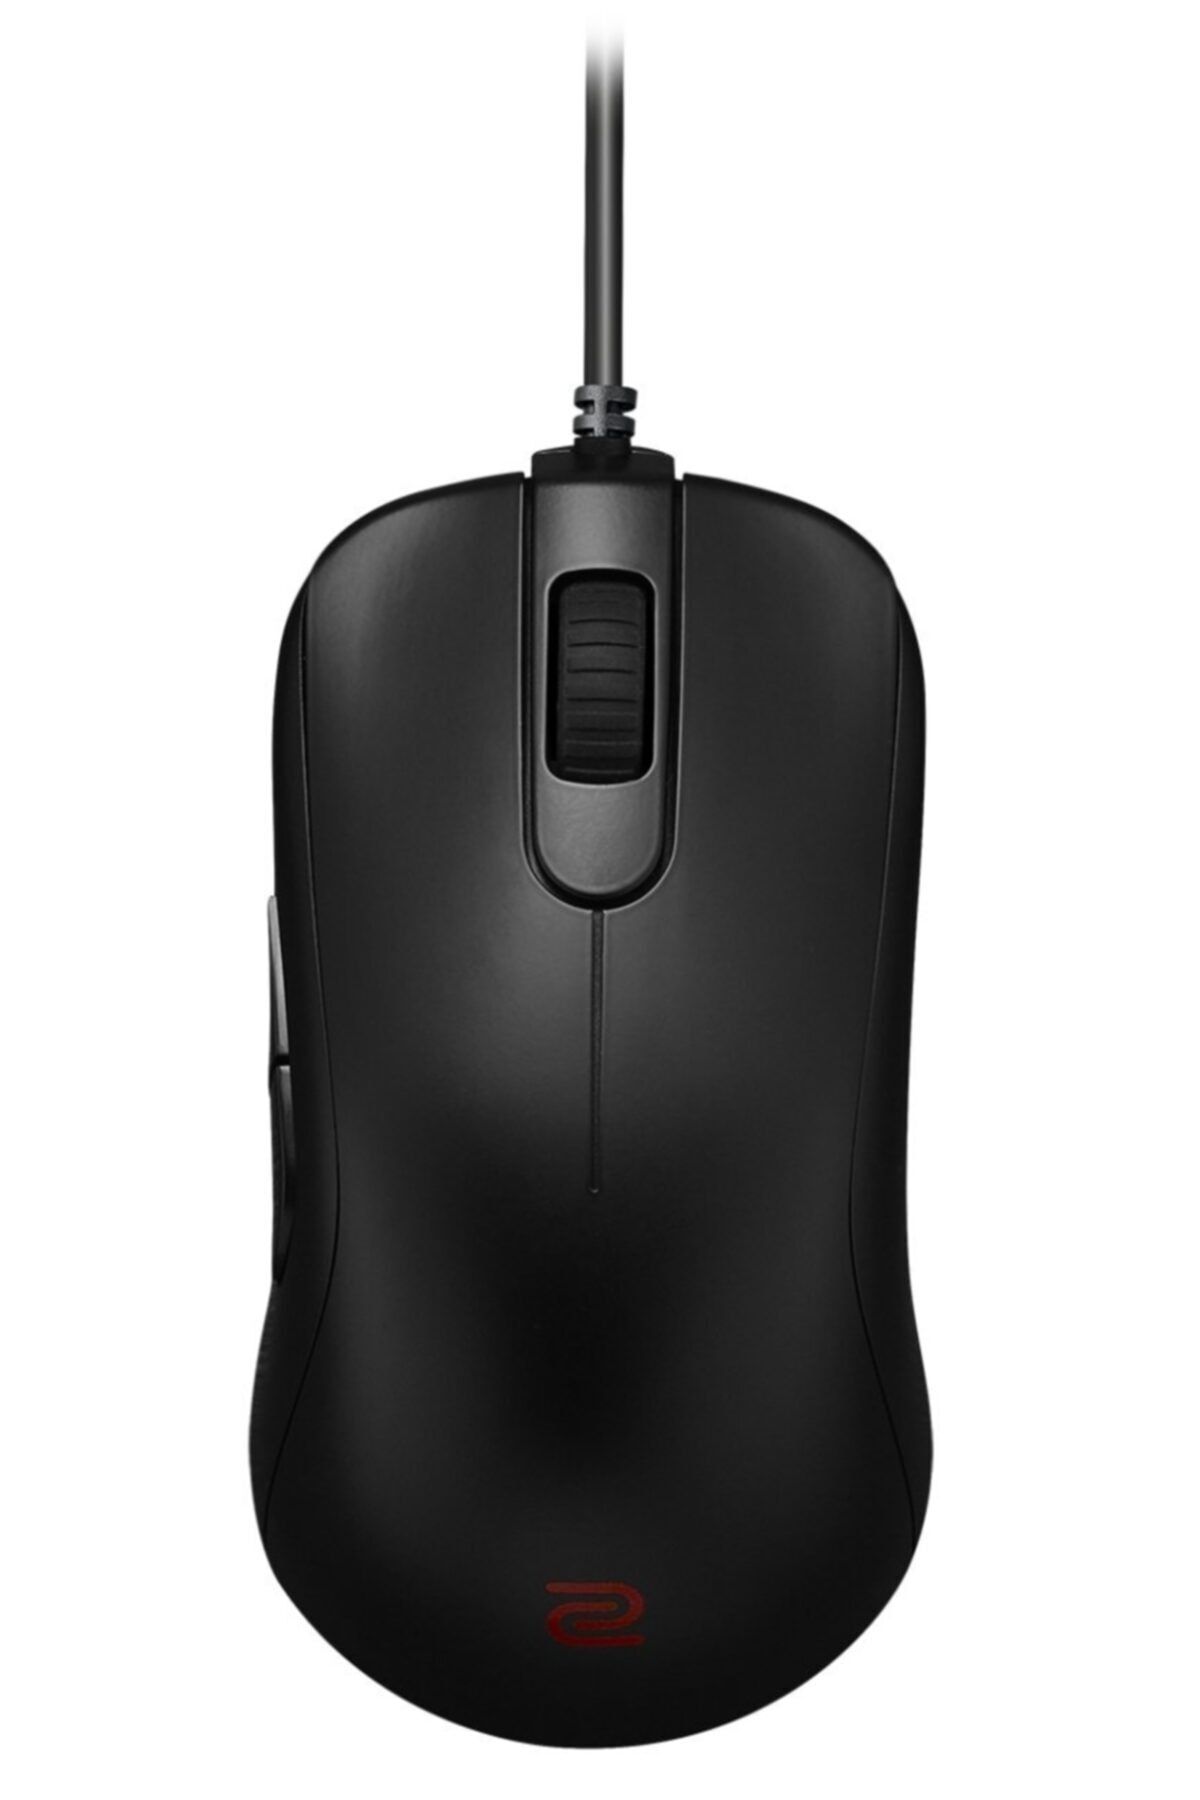 Zowie S2 Black Edition Mouse Gaming 3200 DPI